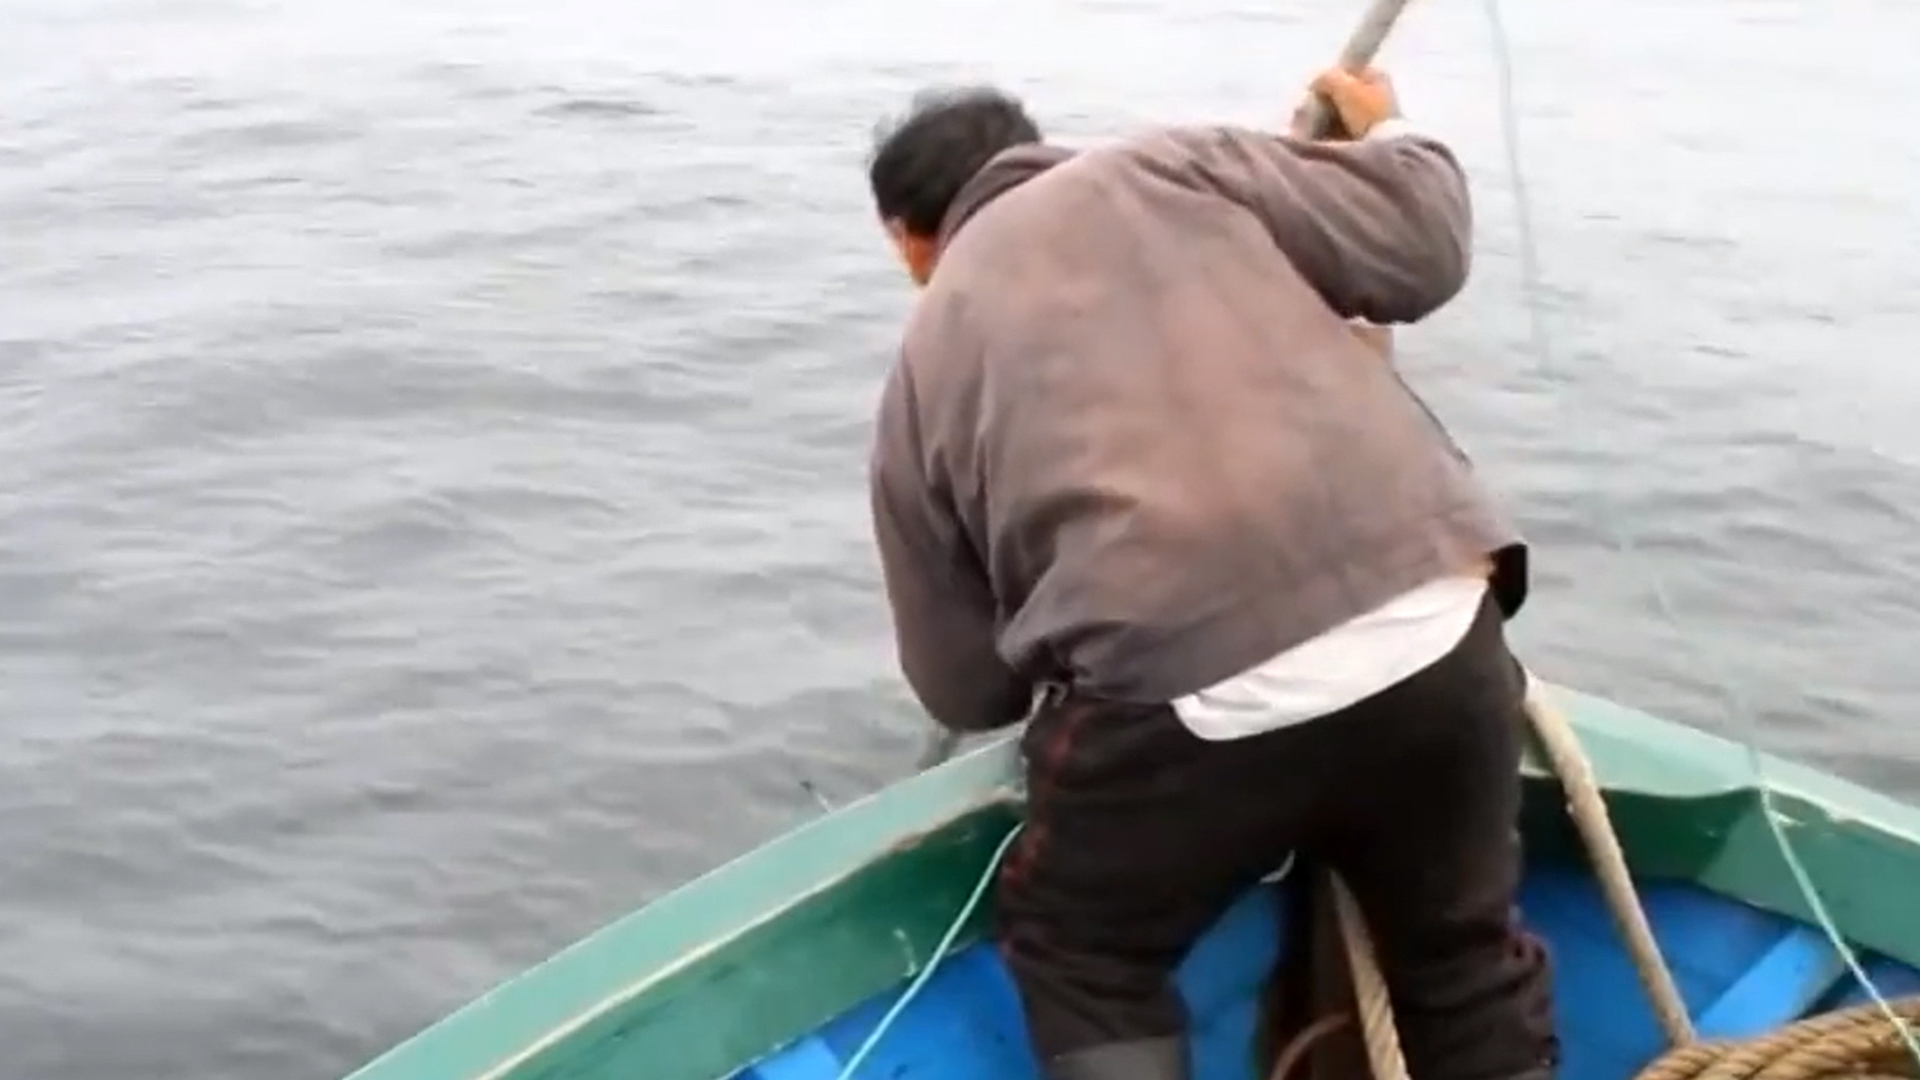 Exclusive Video Exposes Dolphin Slaughter In Japan And Peru